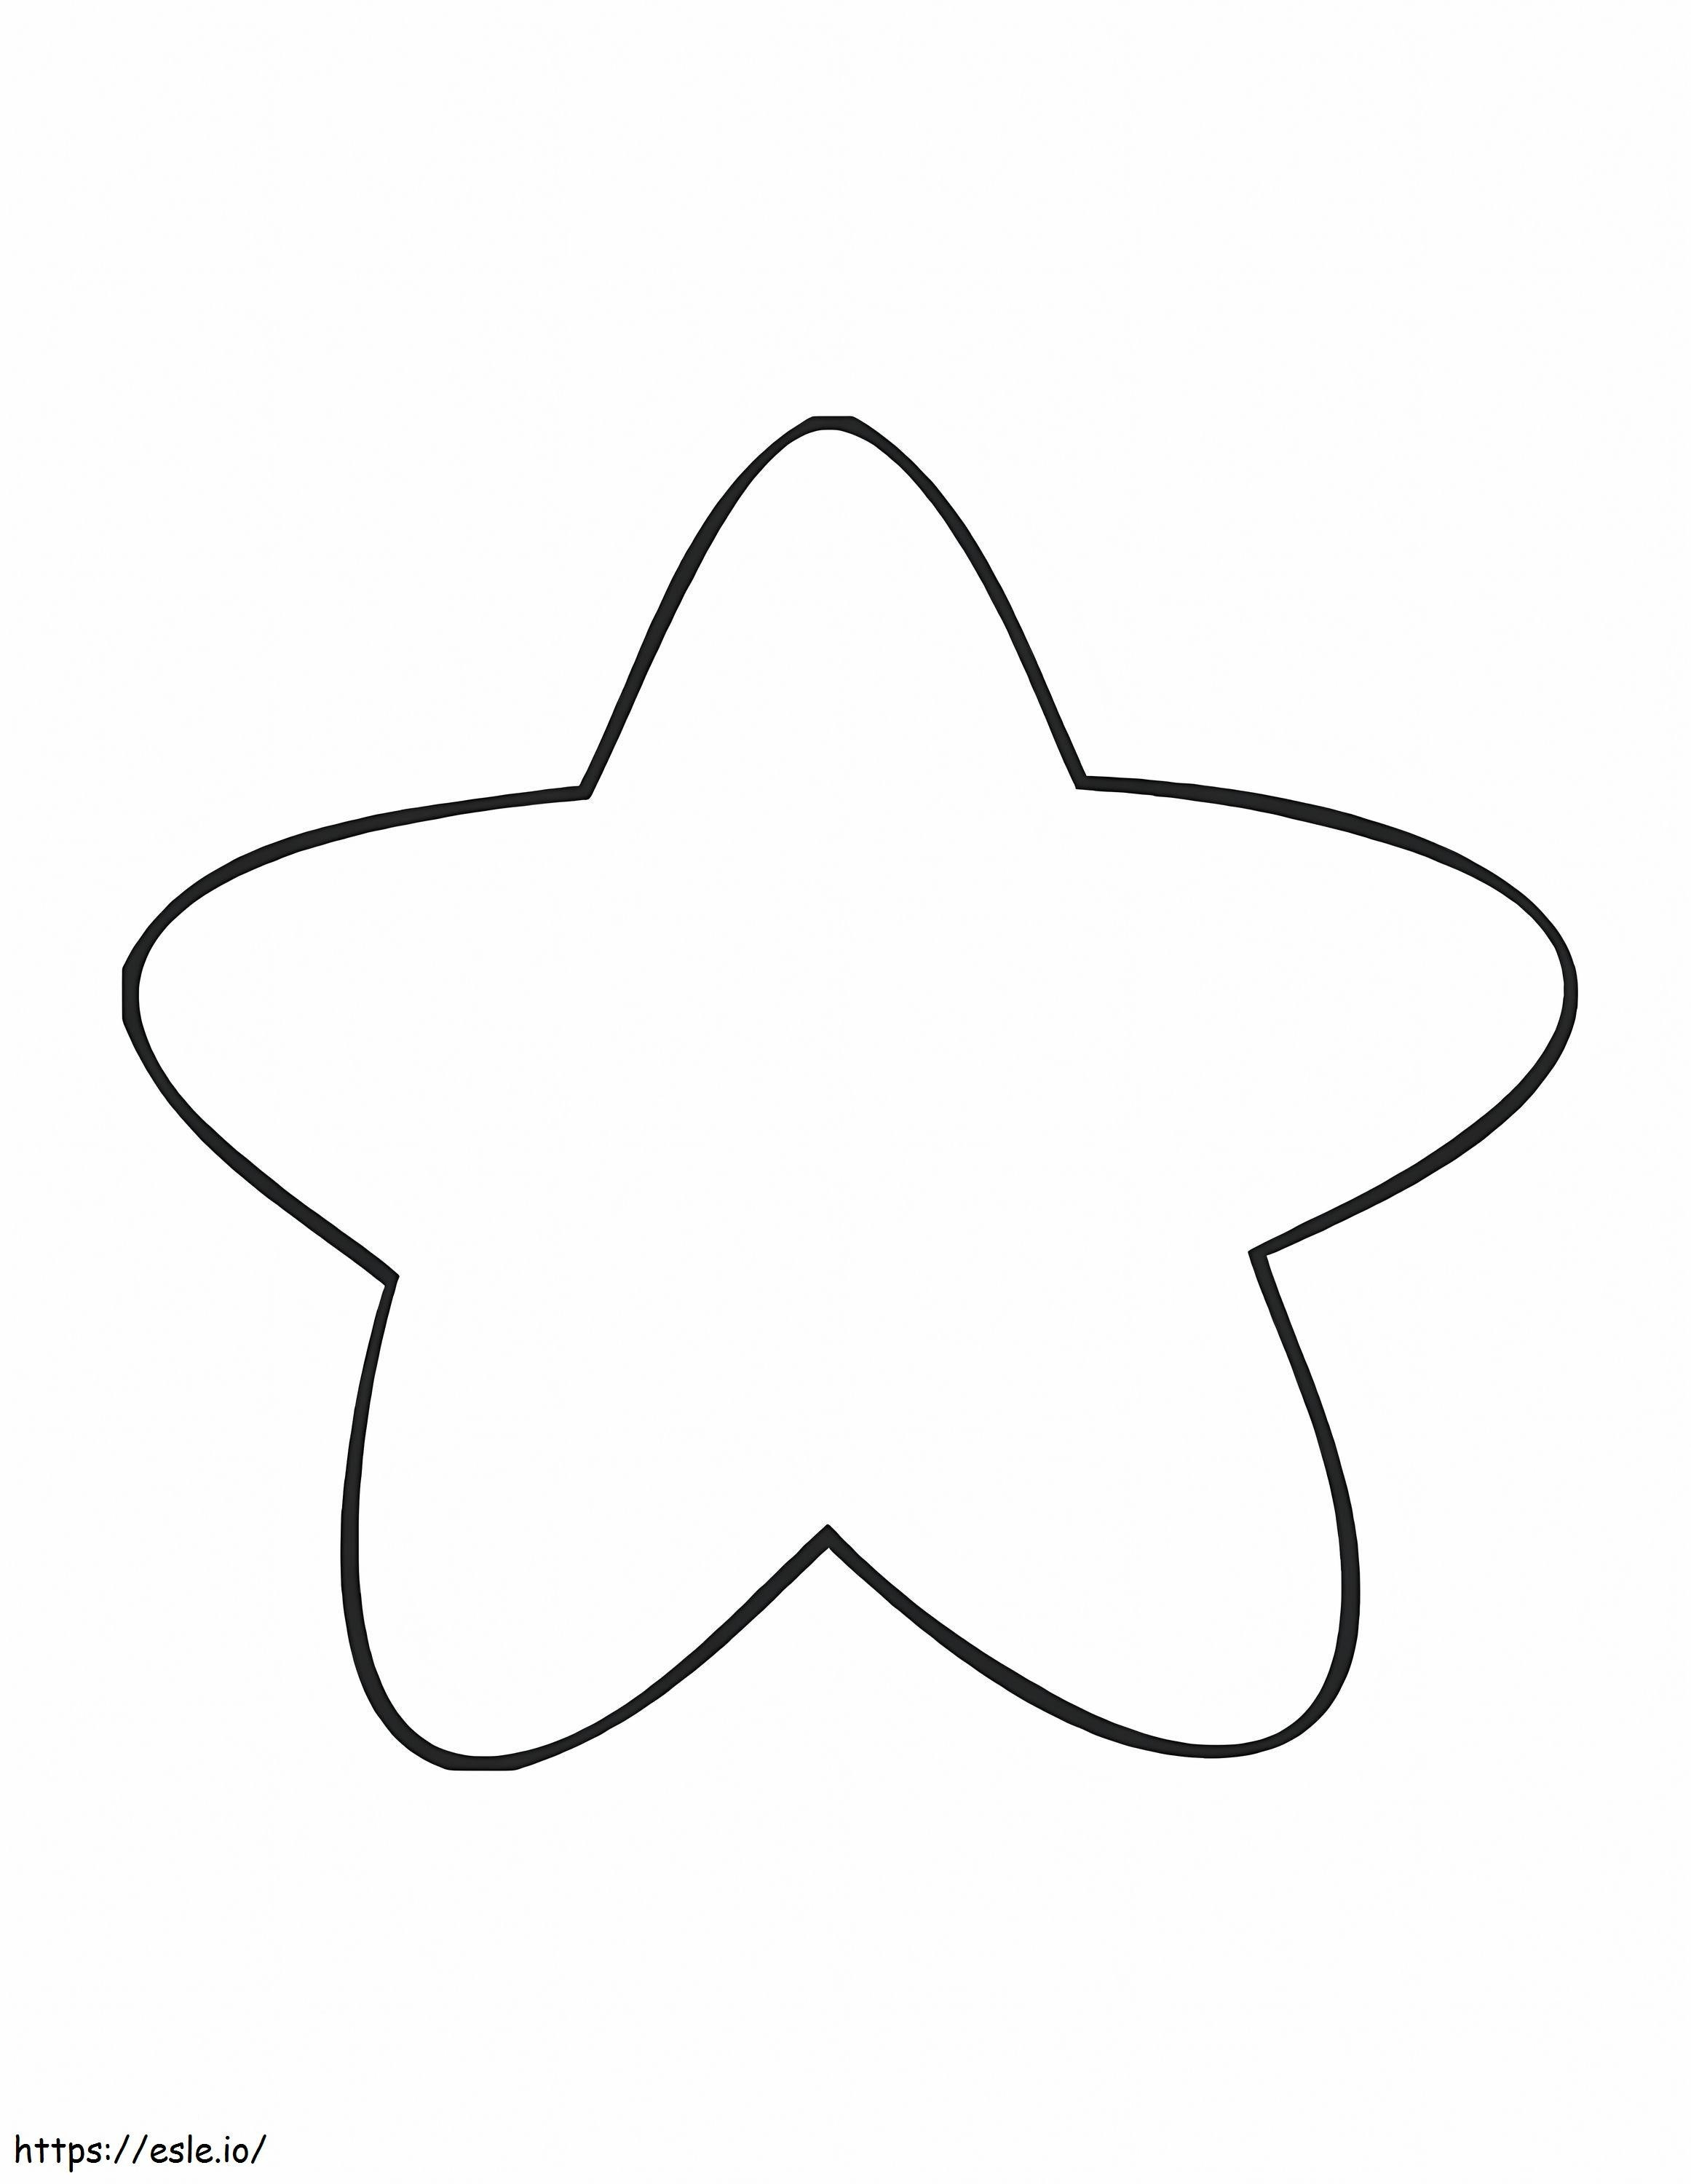 Amazing Star coloring page